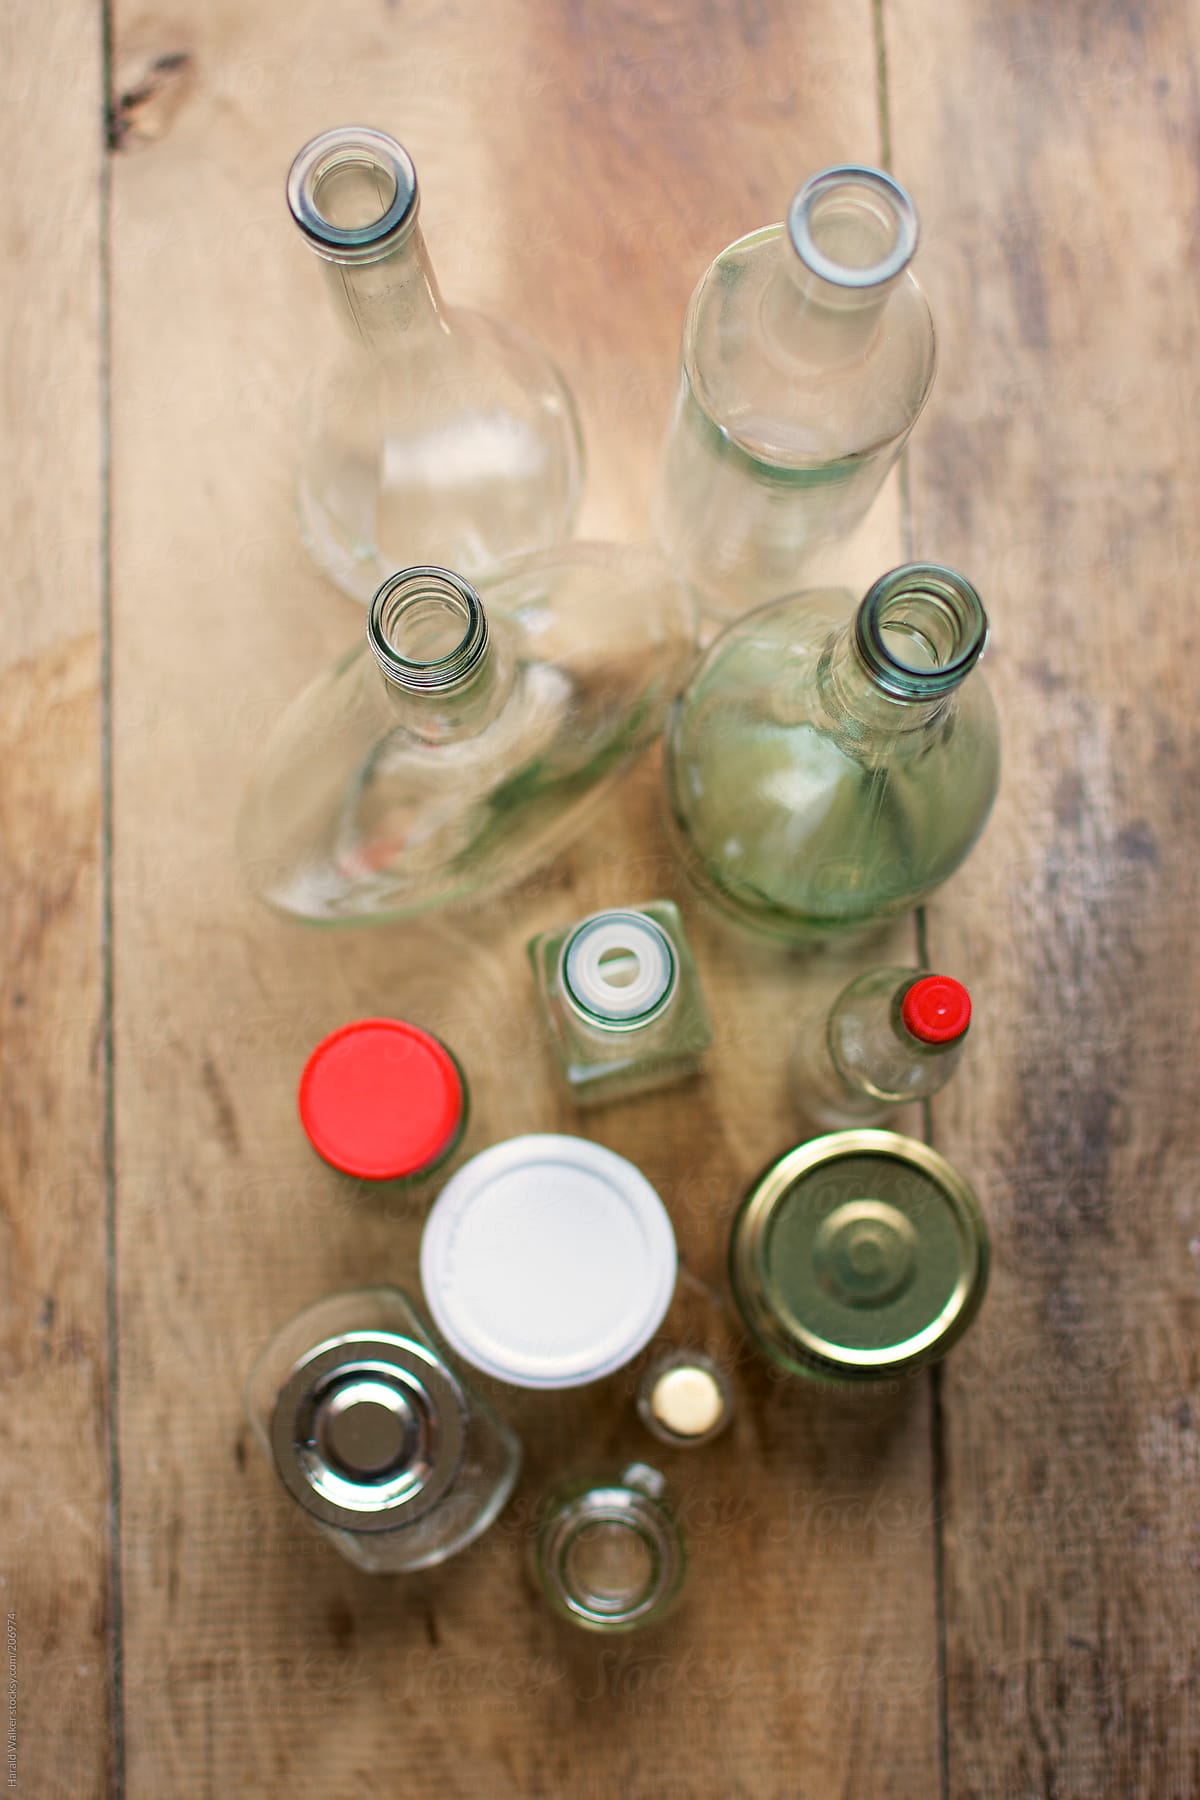 Recycling glass jars and bottles